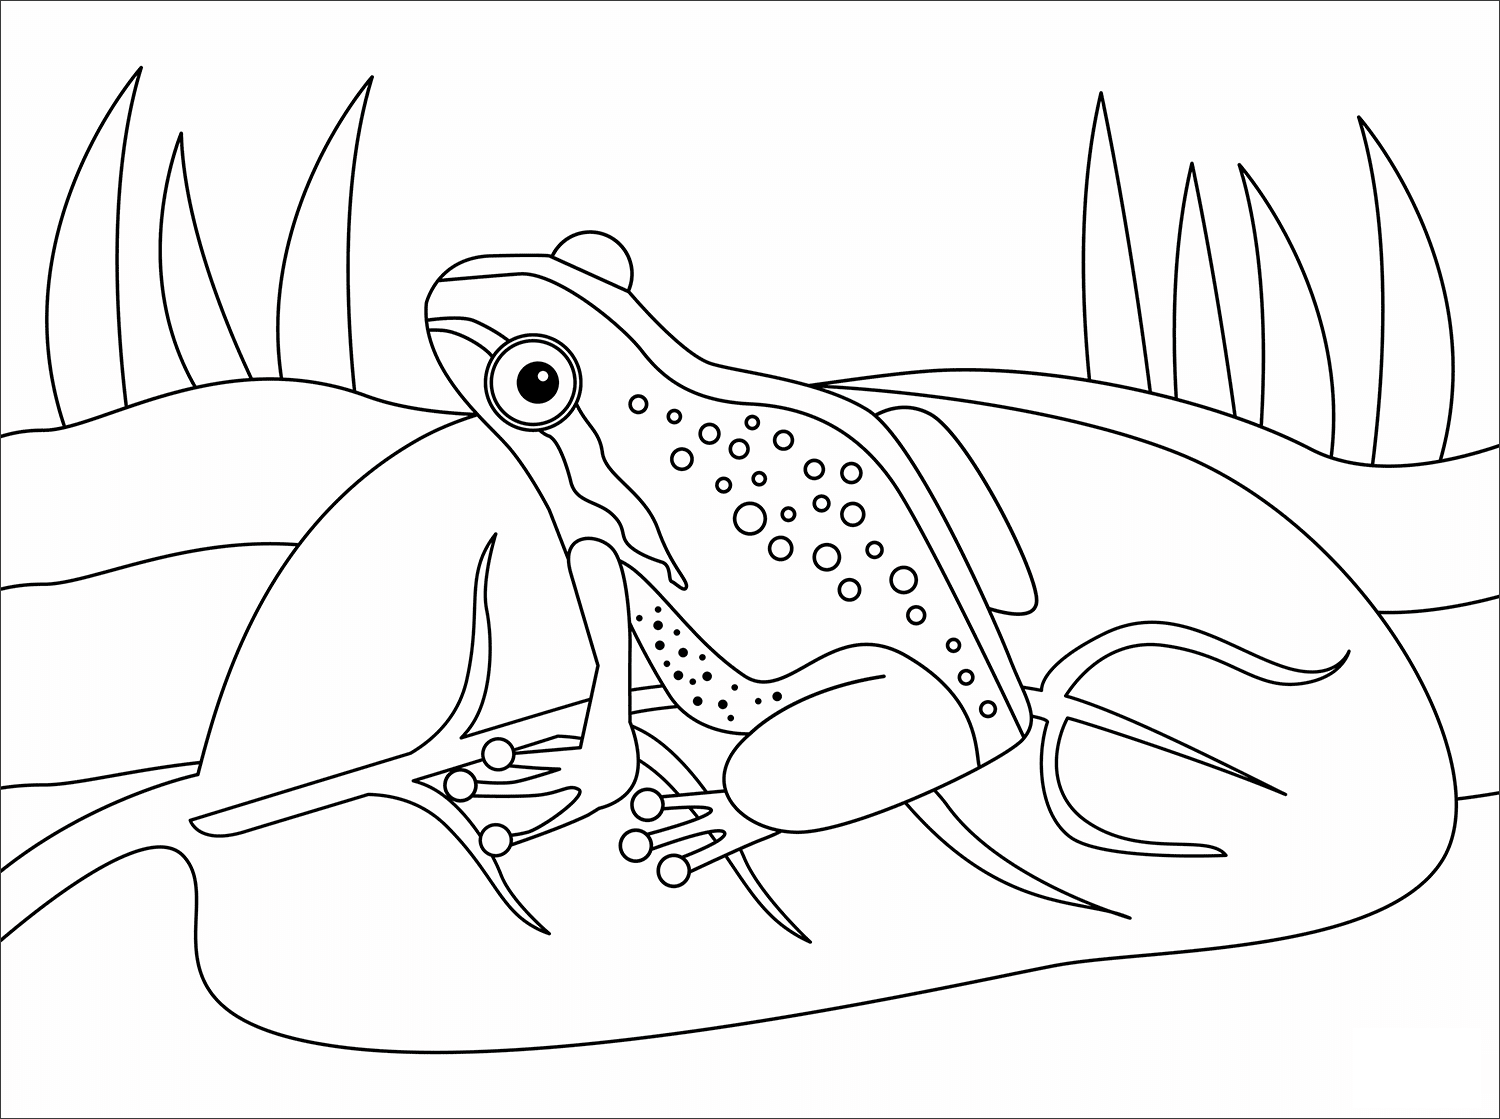 Frog Animal Simple Coloring Page